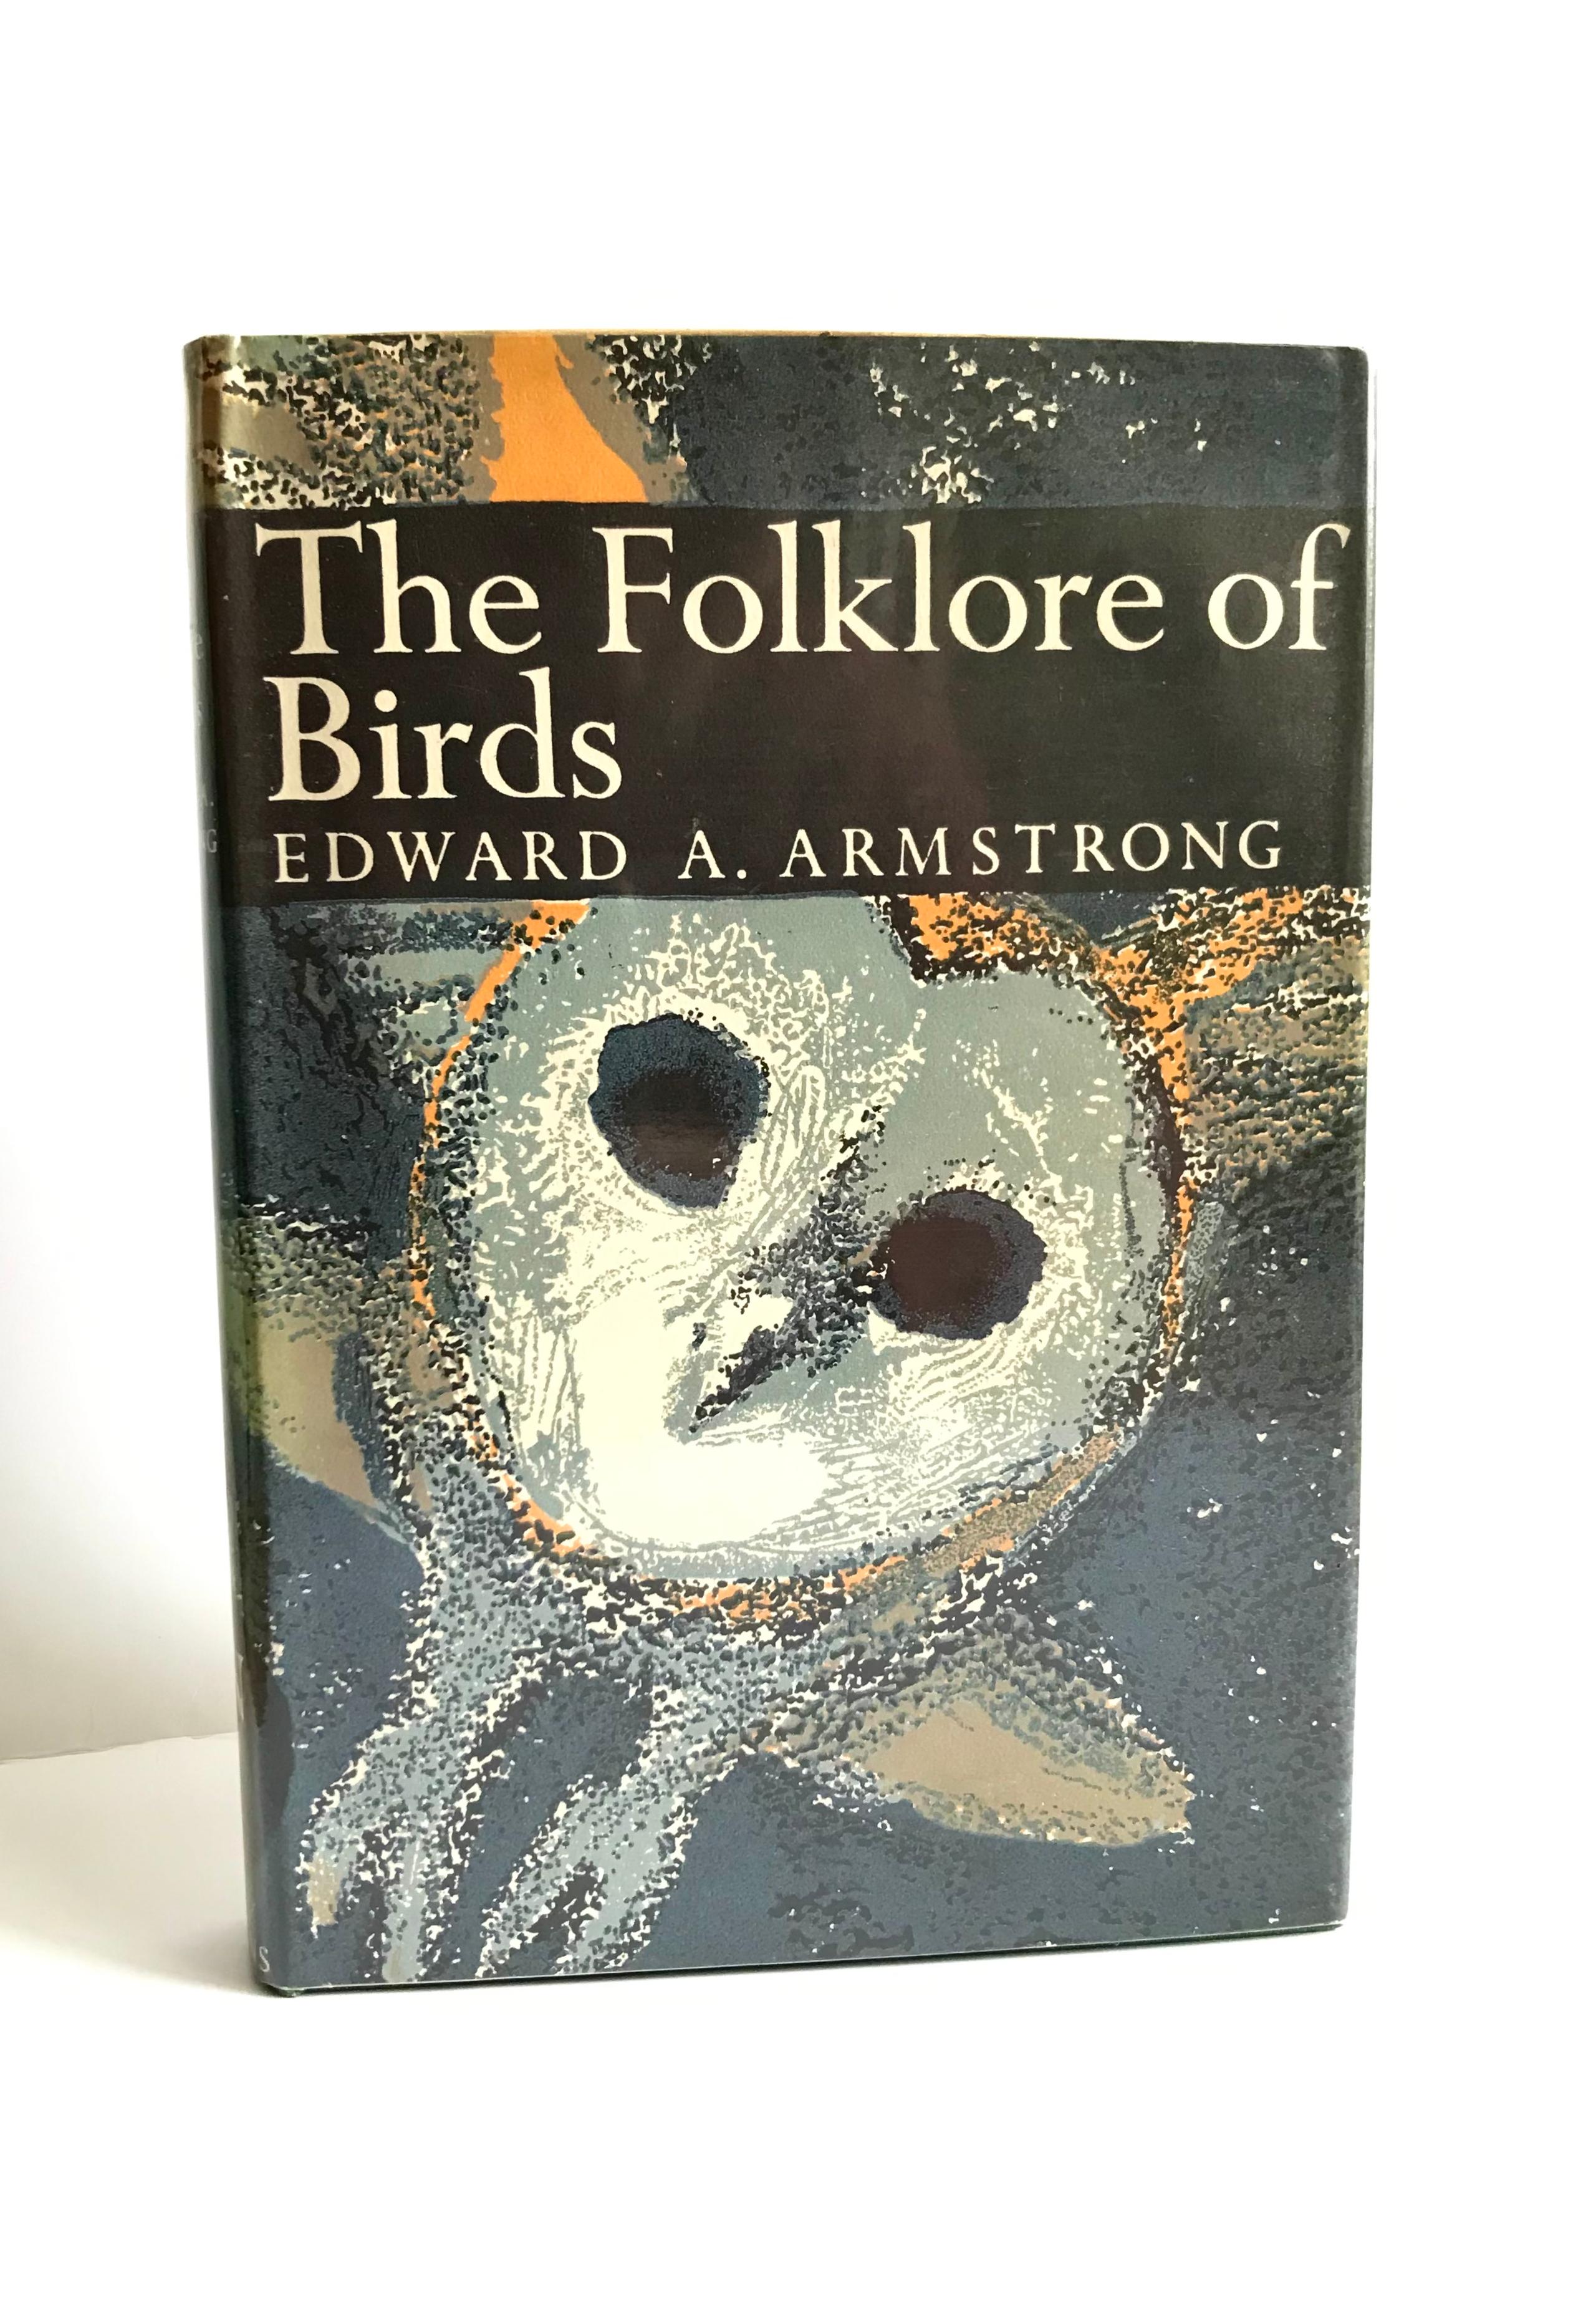 The Folklore of Birds by Edward A. Armstrong